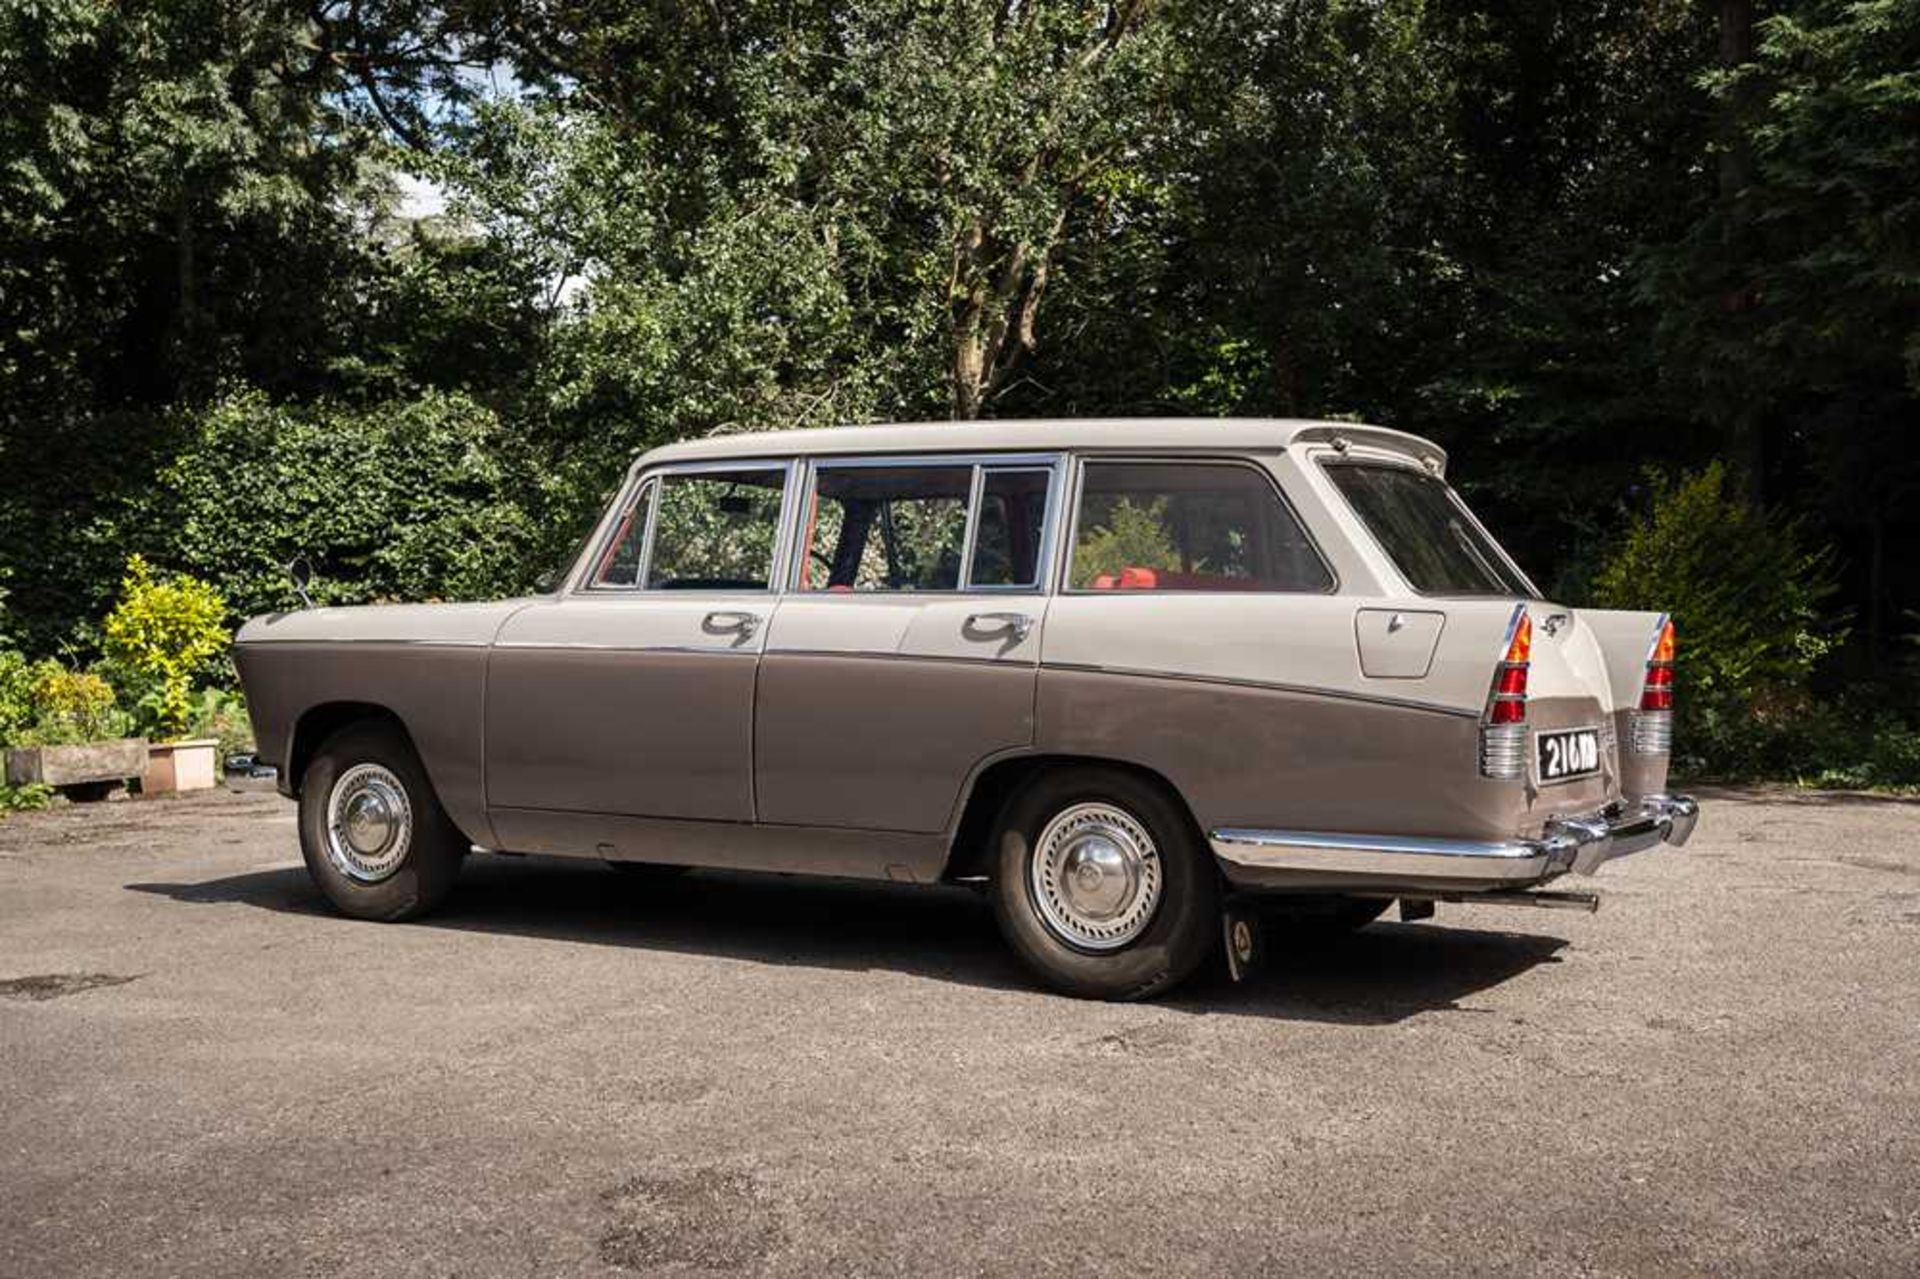 1964 Morris Oxford Series VI Farina Traveller Just 7,000 miles from new - Image 12 of 98